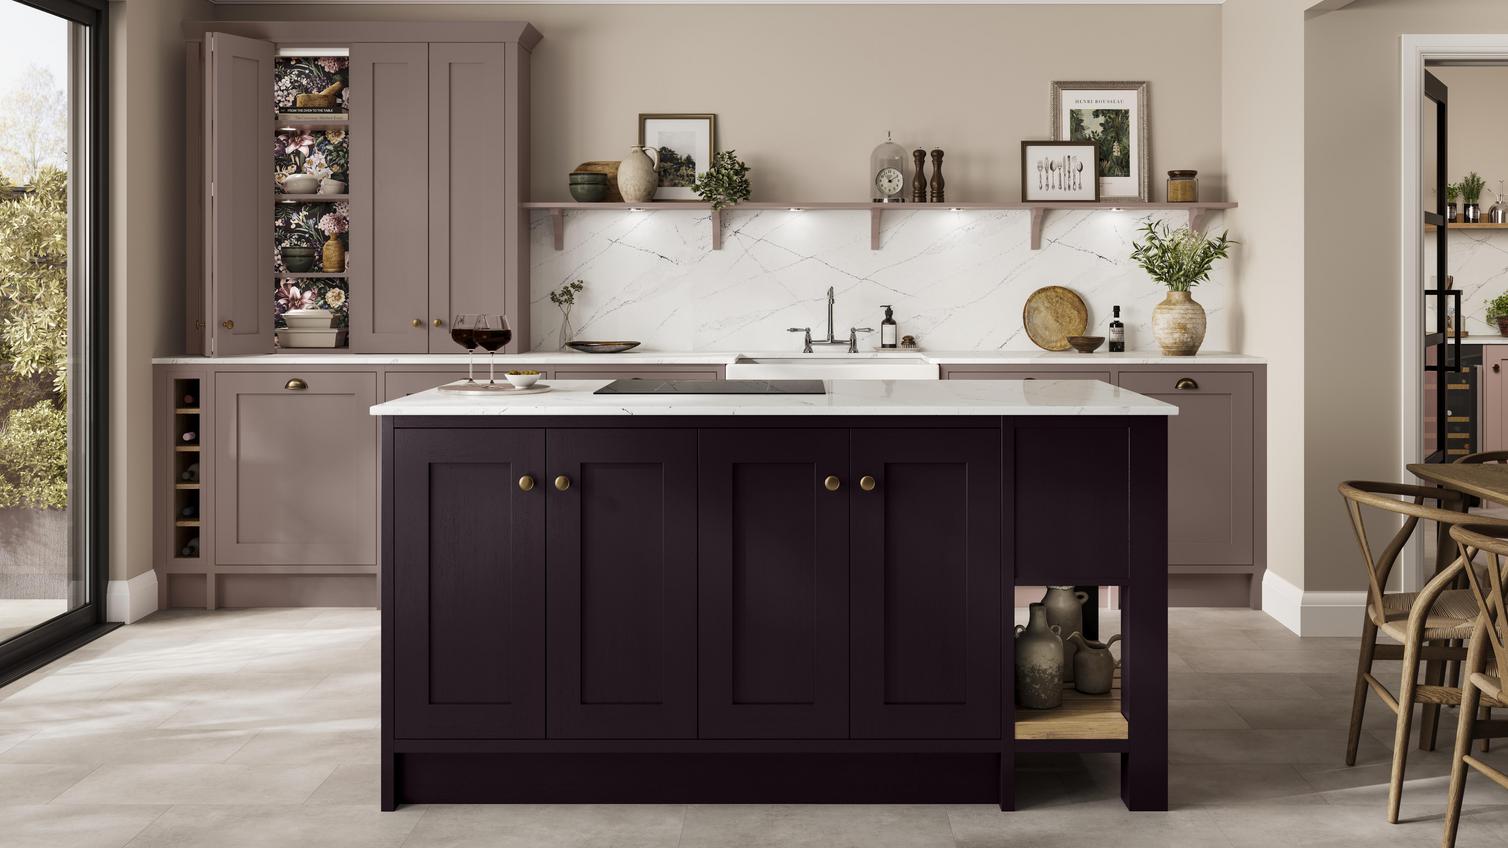 Two tone shaker kitchen ideas in blackberry and antique rose. Includes white worktops, an induction hob, and grey floors.